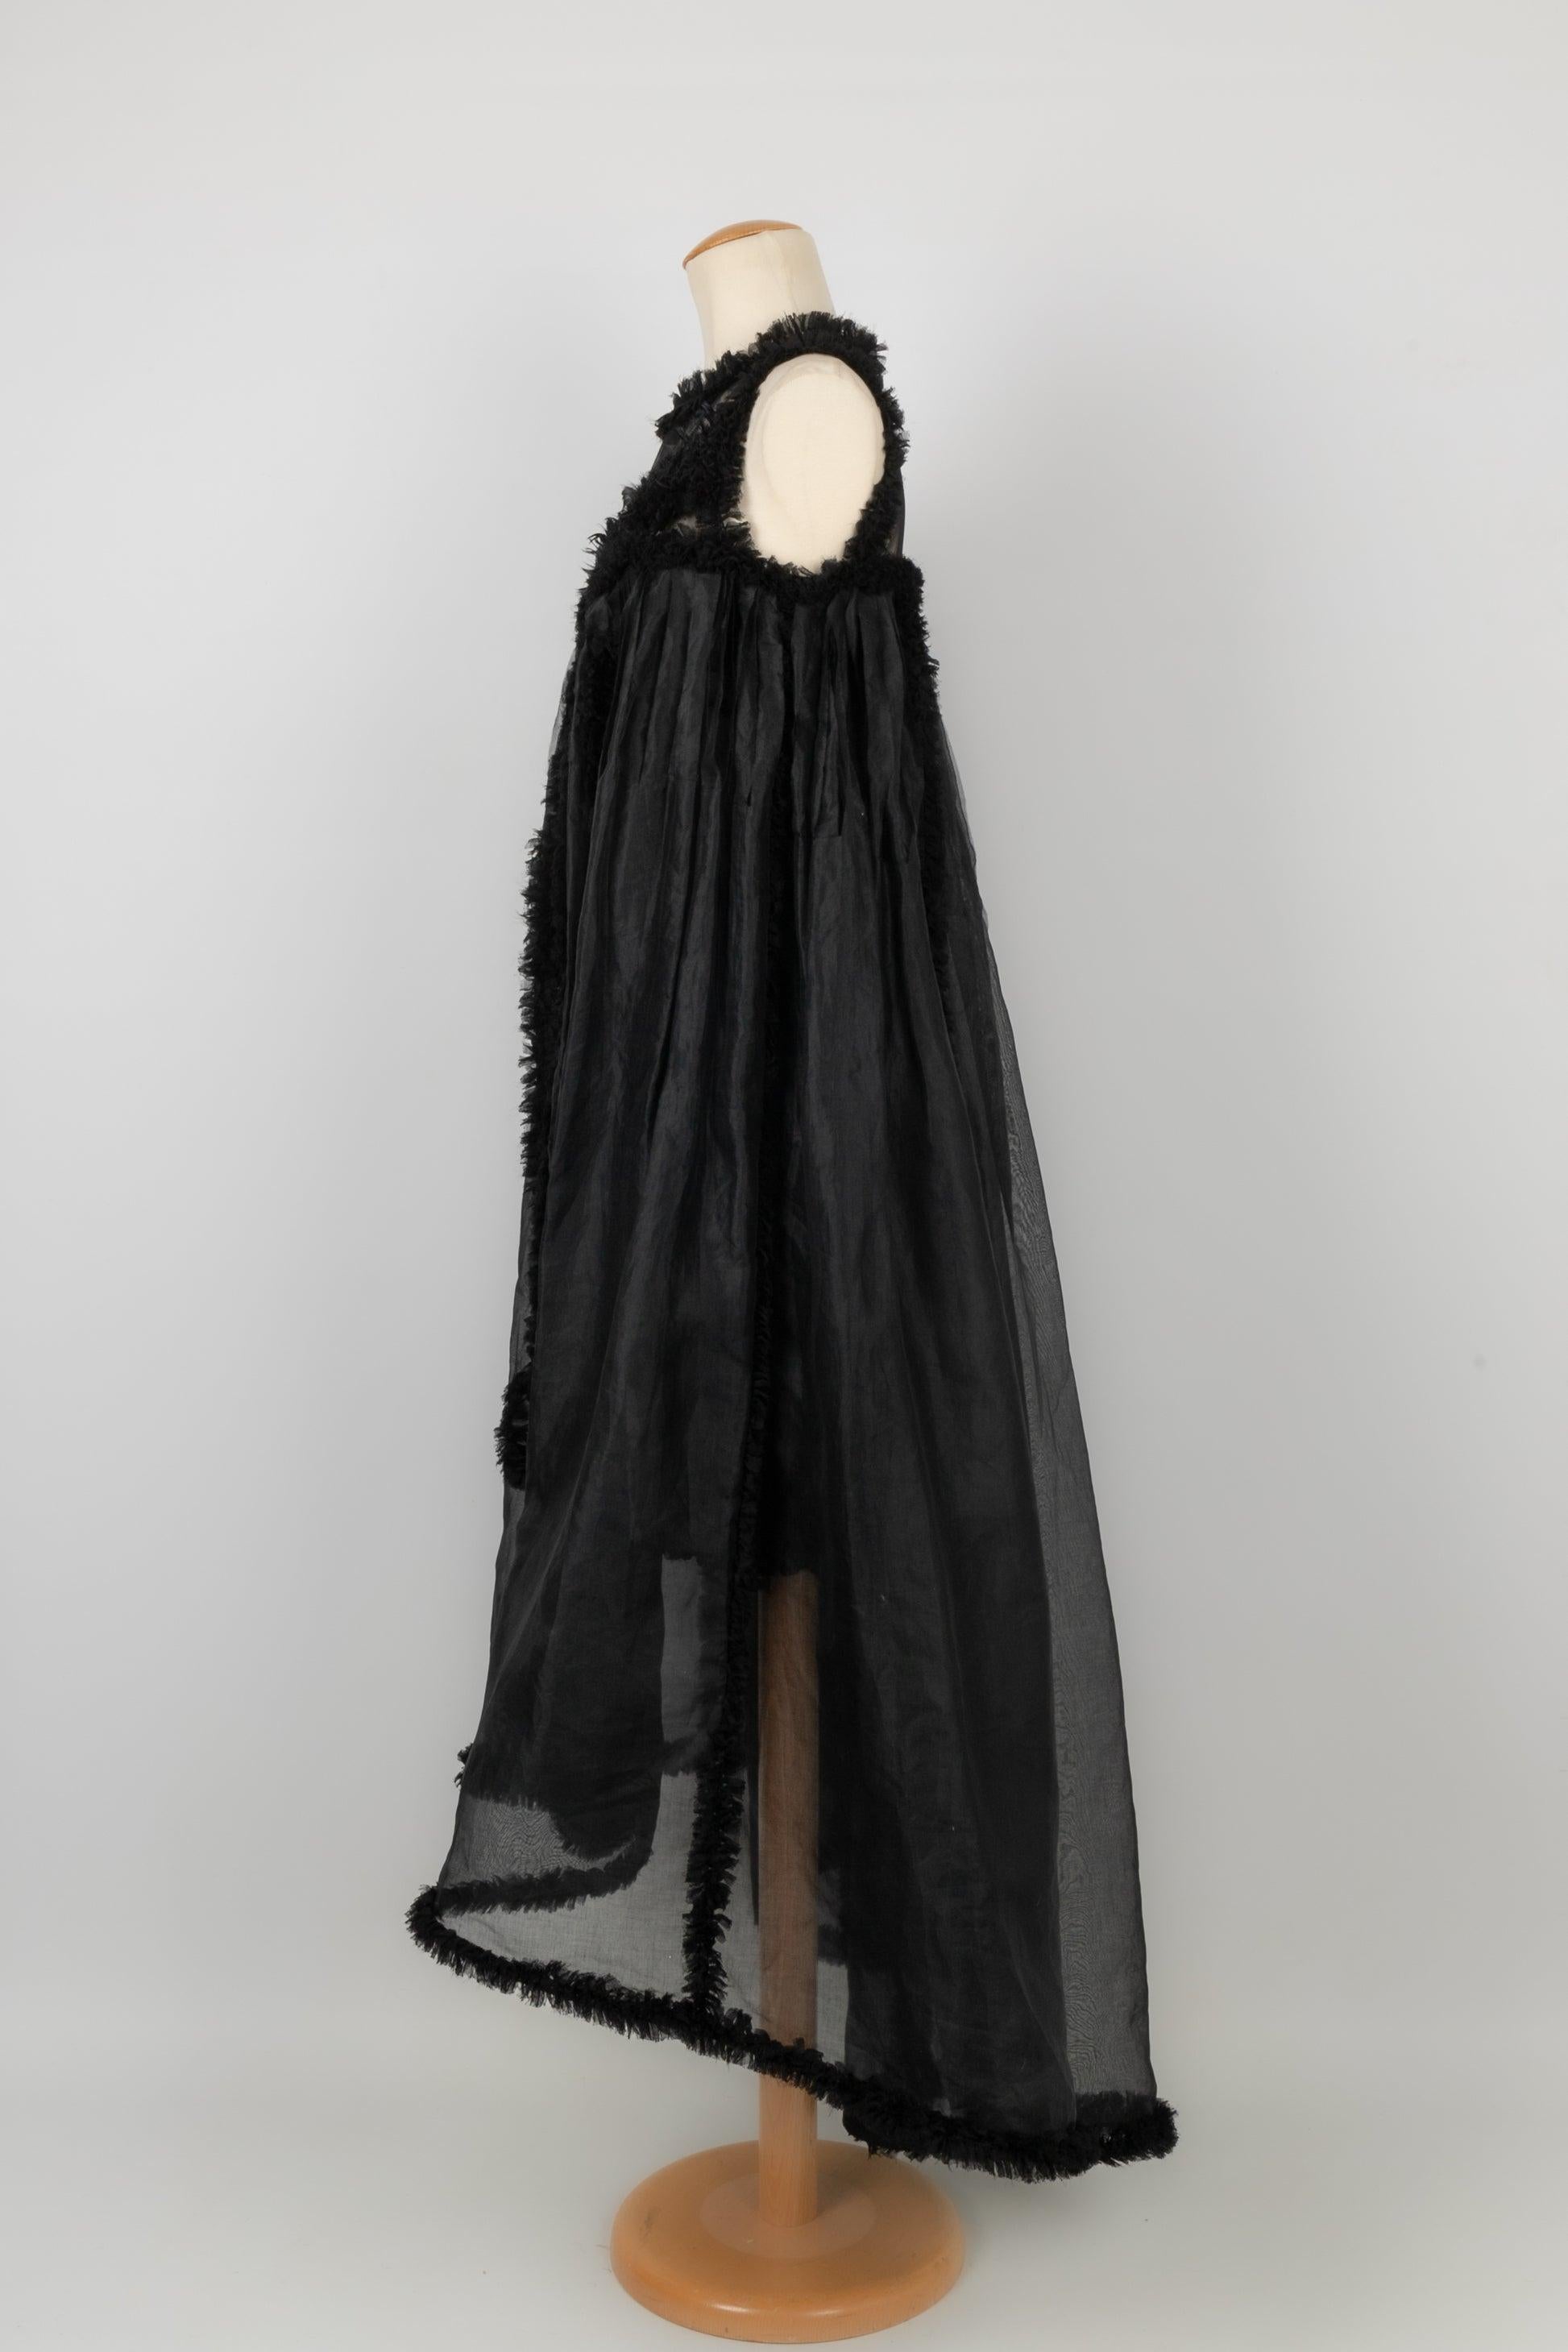 Chanel - (Made in France) Silk taffeta black dress sewn with feathers and split into two sides on the front, opening on a shorter dress. 36FR size.
Collection Prêt-à-Porter Printemps-Eté 2011 sous la direction de Karl Lagerfeld. 

Additional